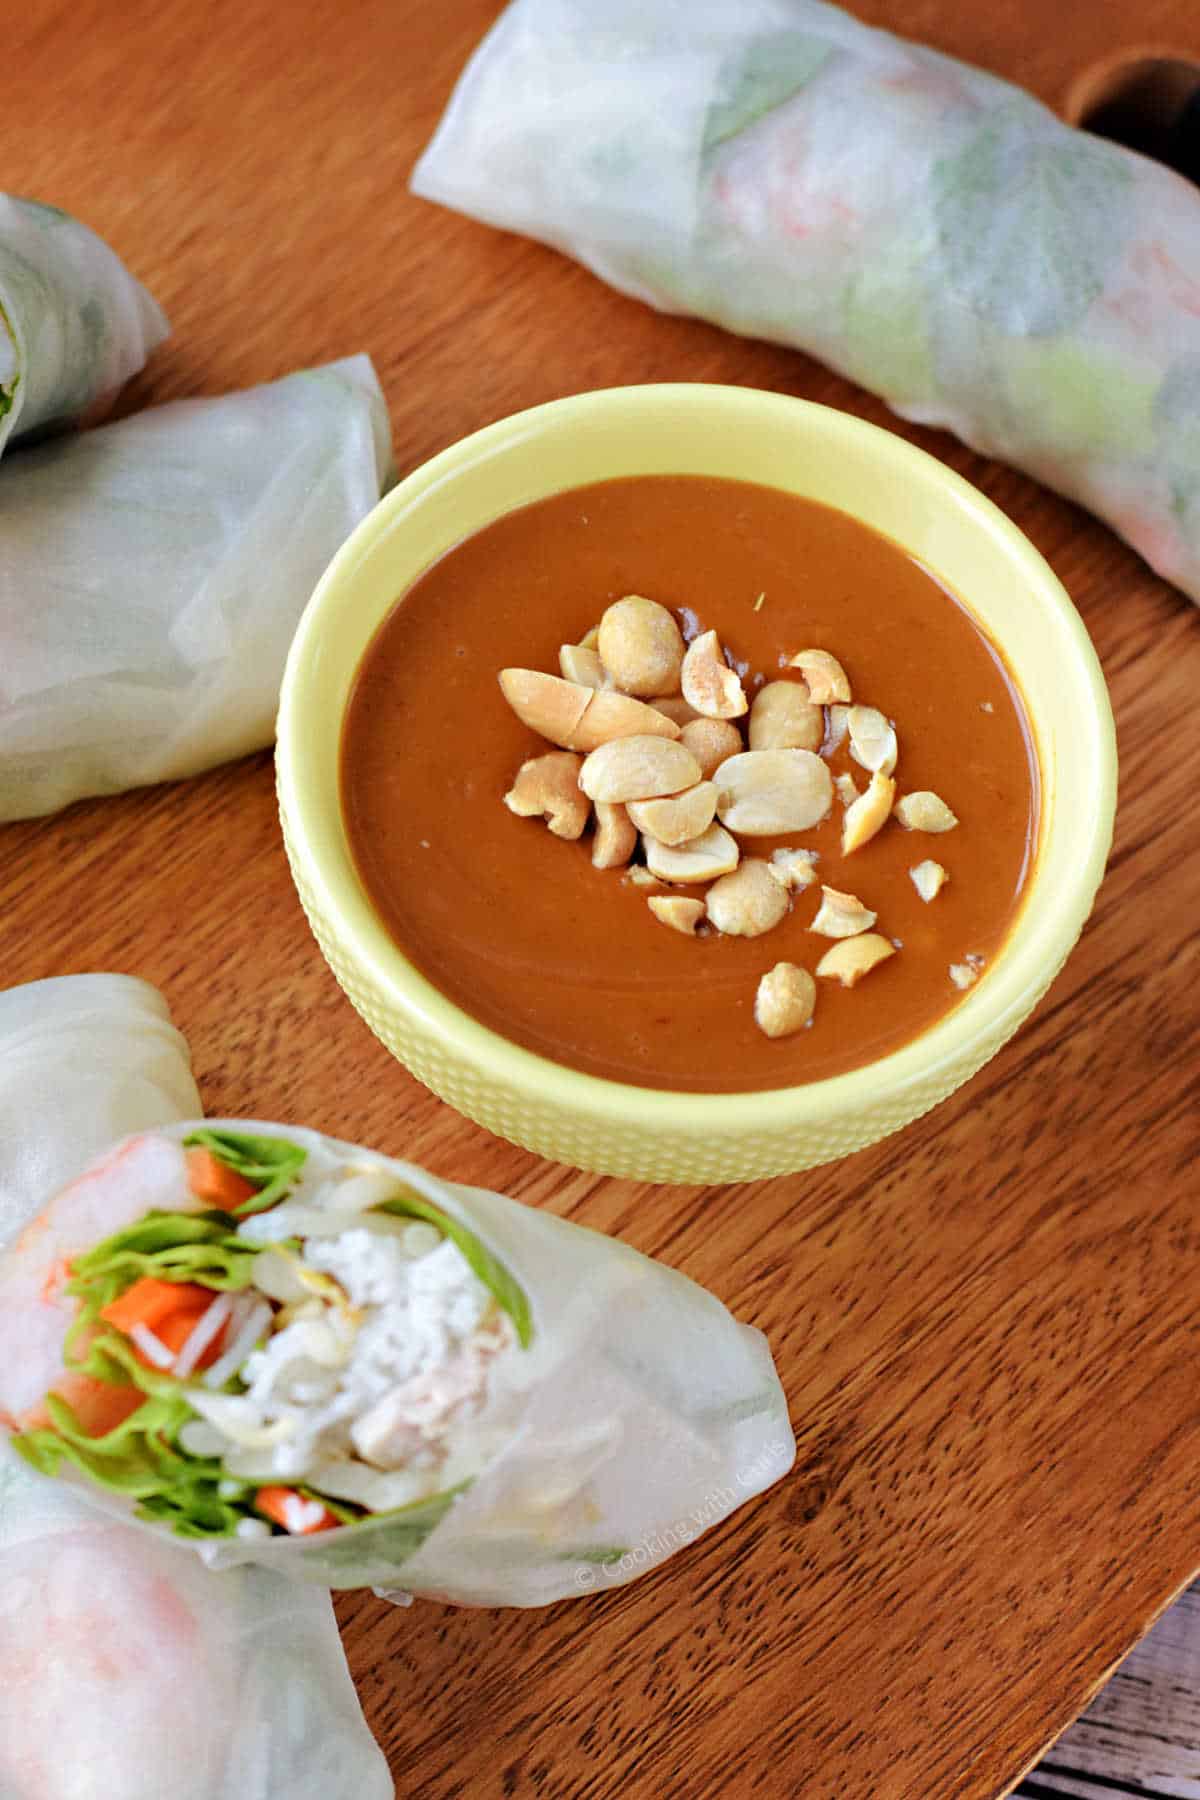 A small bowl filled with Vietnamese peanut sauce with chopped peanuts sprinkled on top and surrounded by fresh spring rolls.